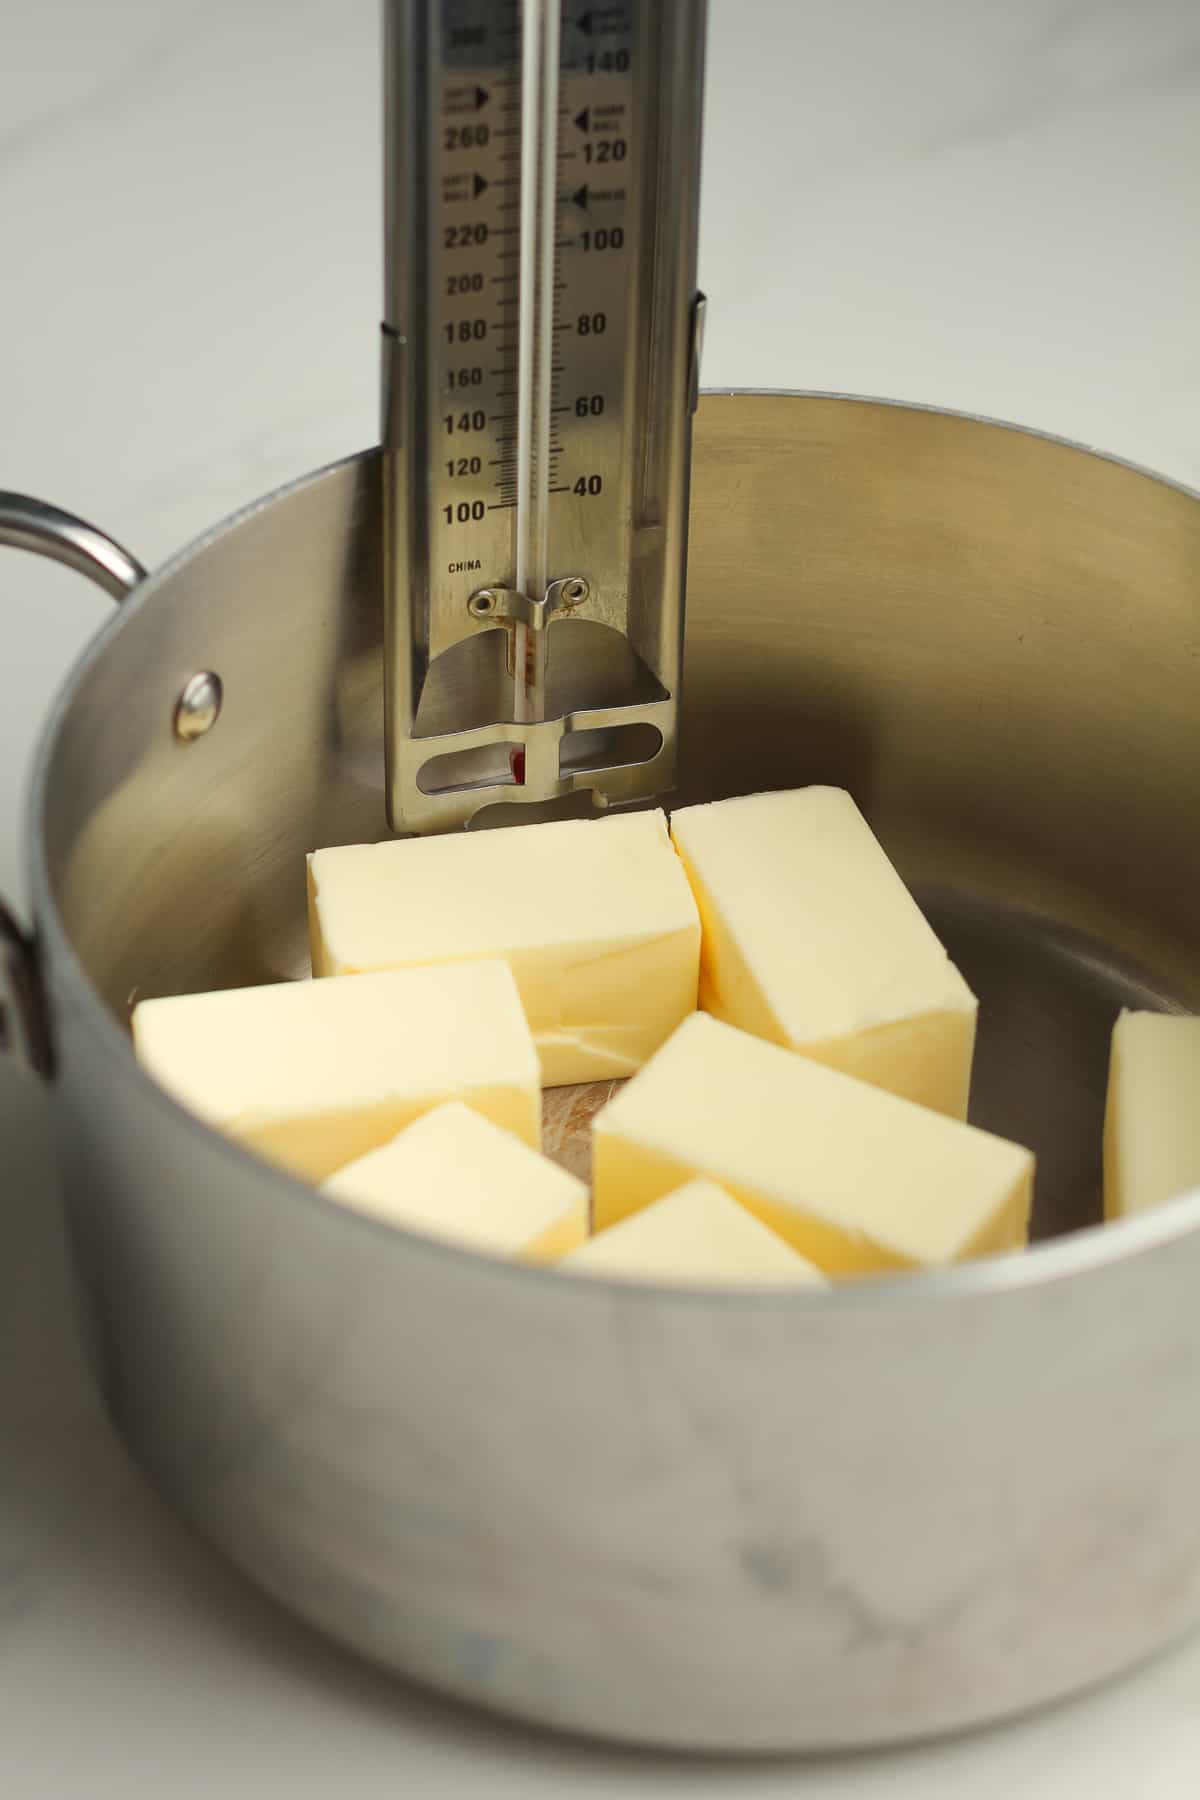 The butter in a sauce pan with a candy thermometer attached to the side of the pan.